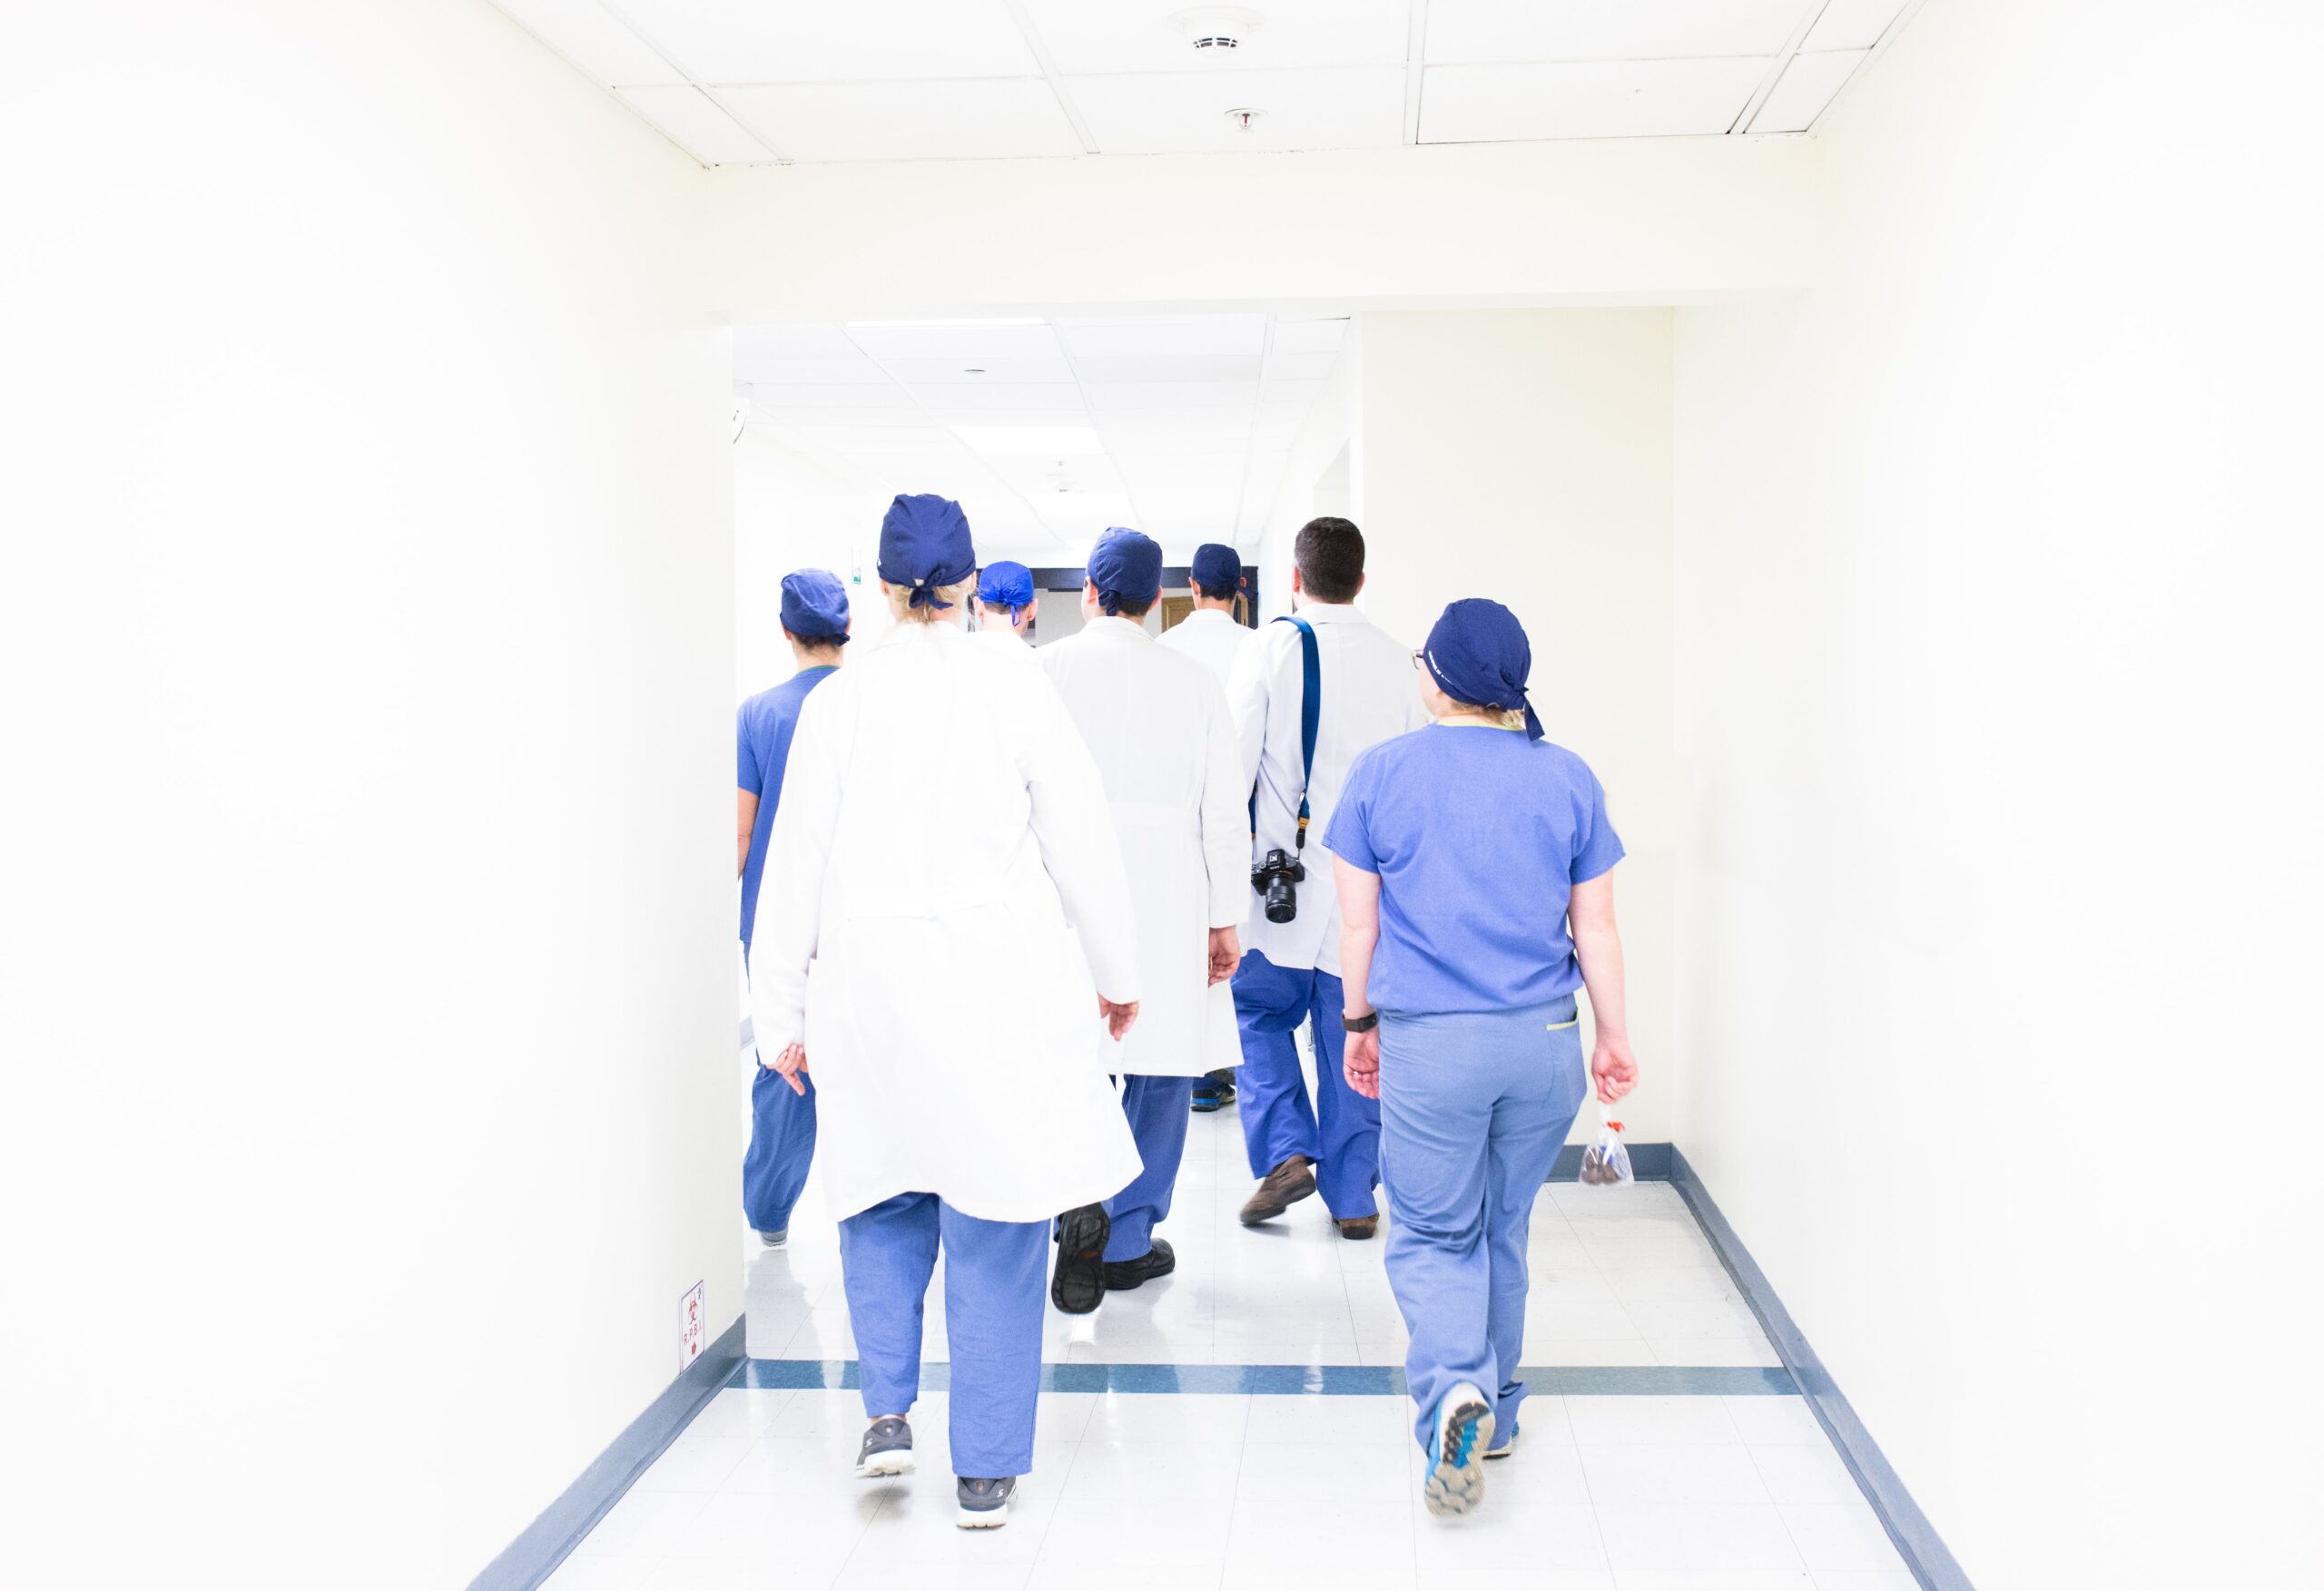 GROWING DEMAND AMONG LABOR STAFF IN HEALTHCARE